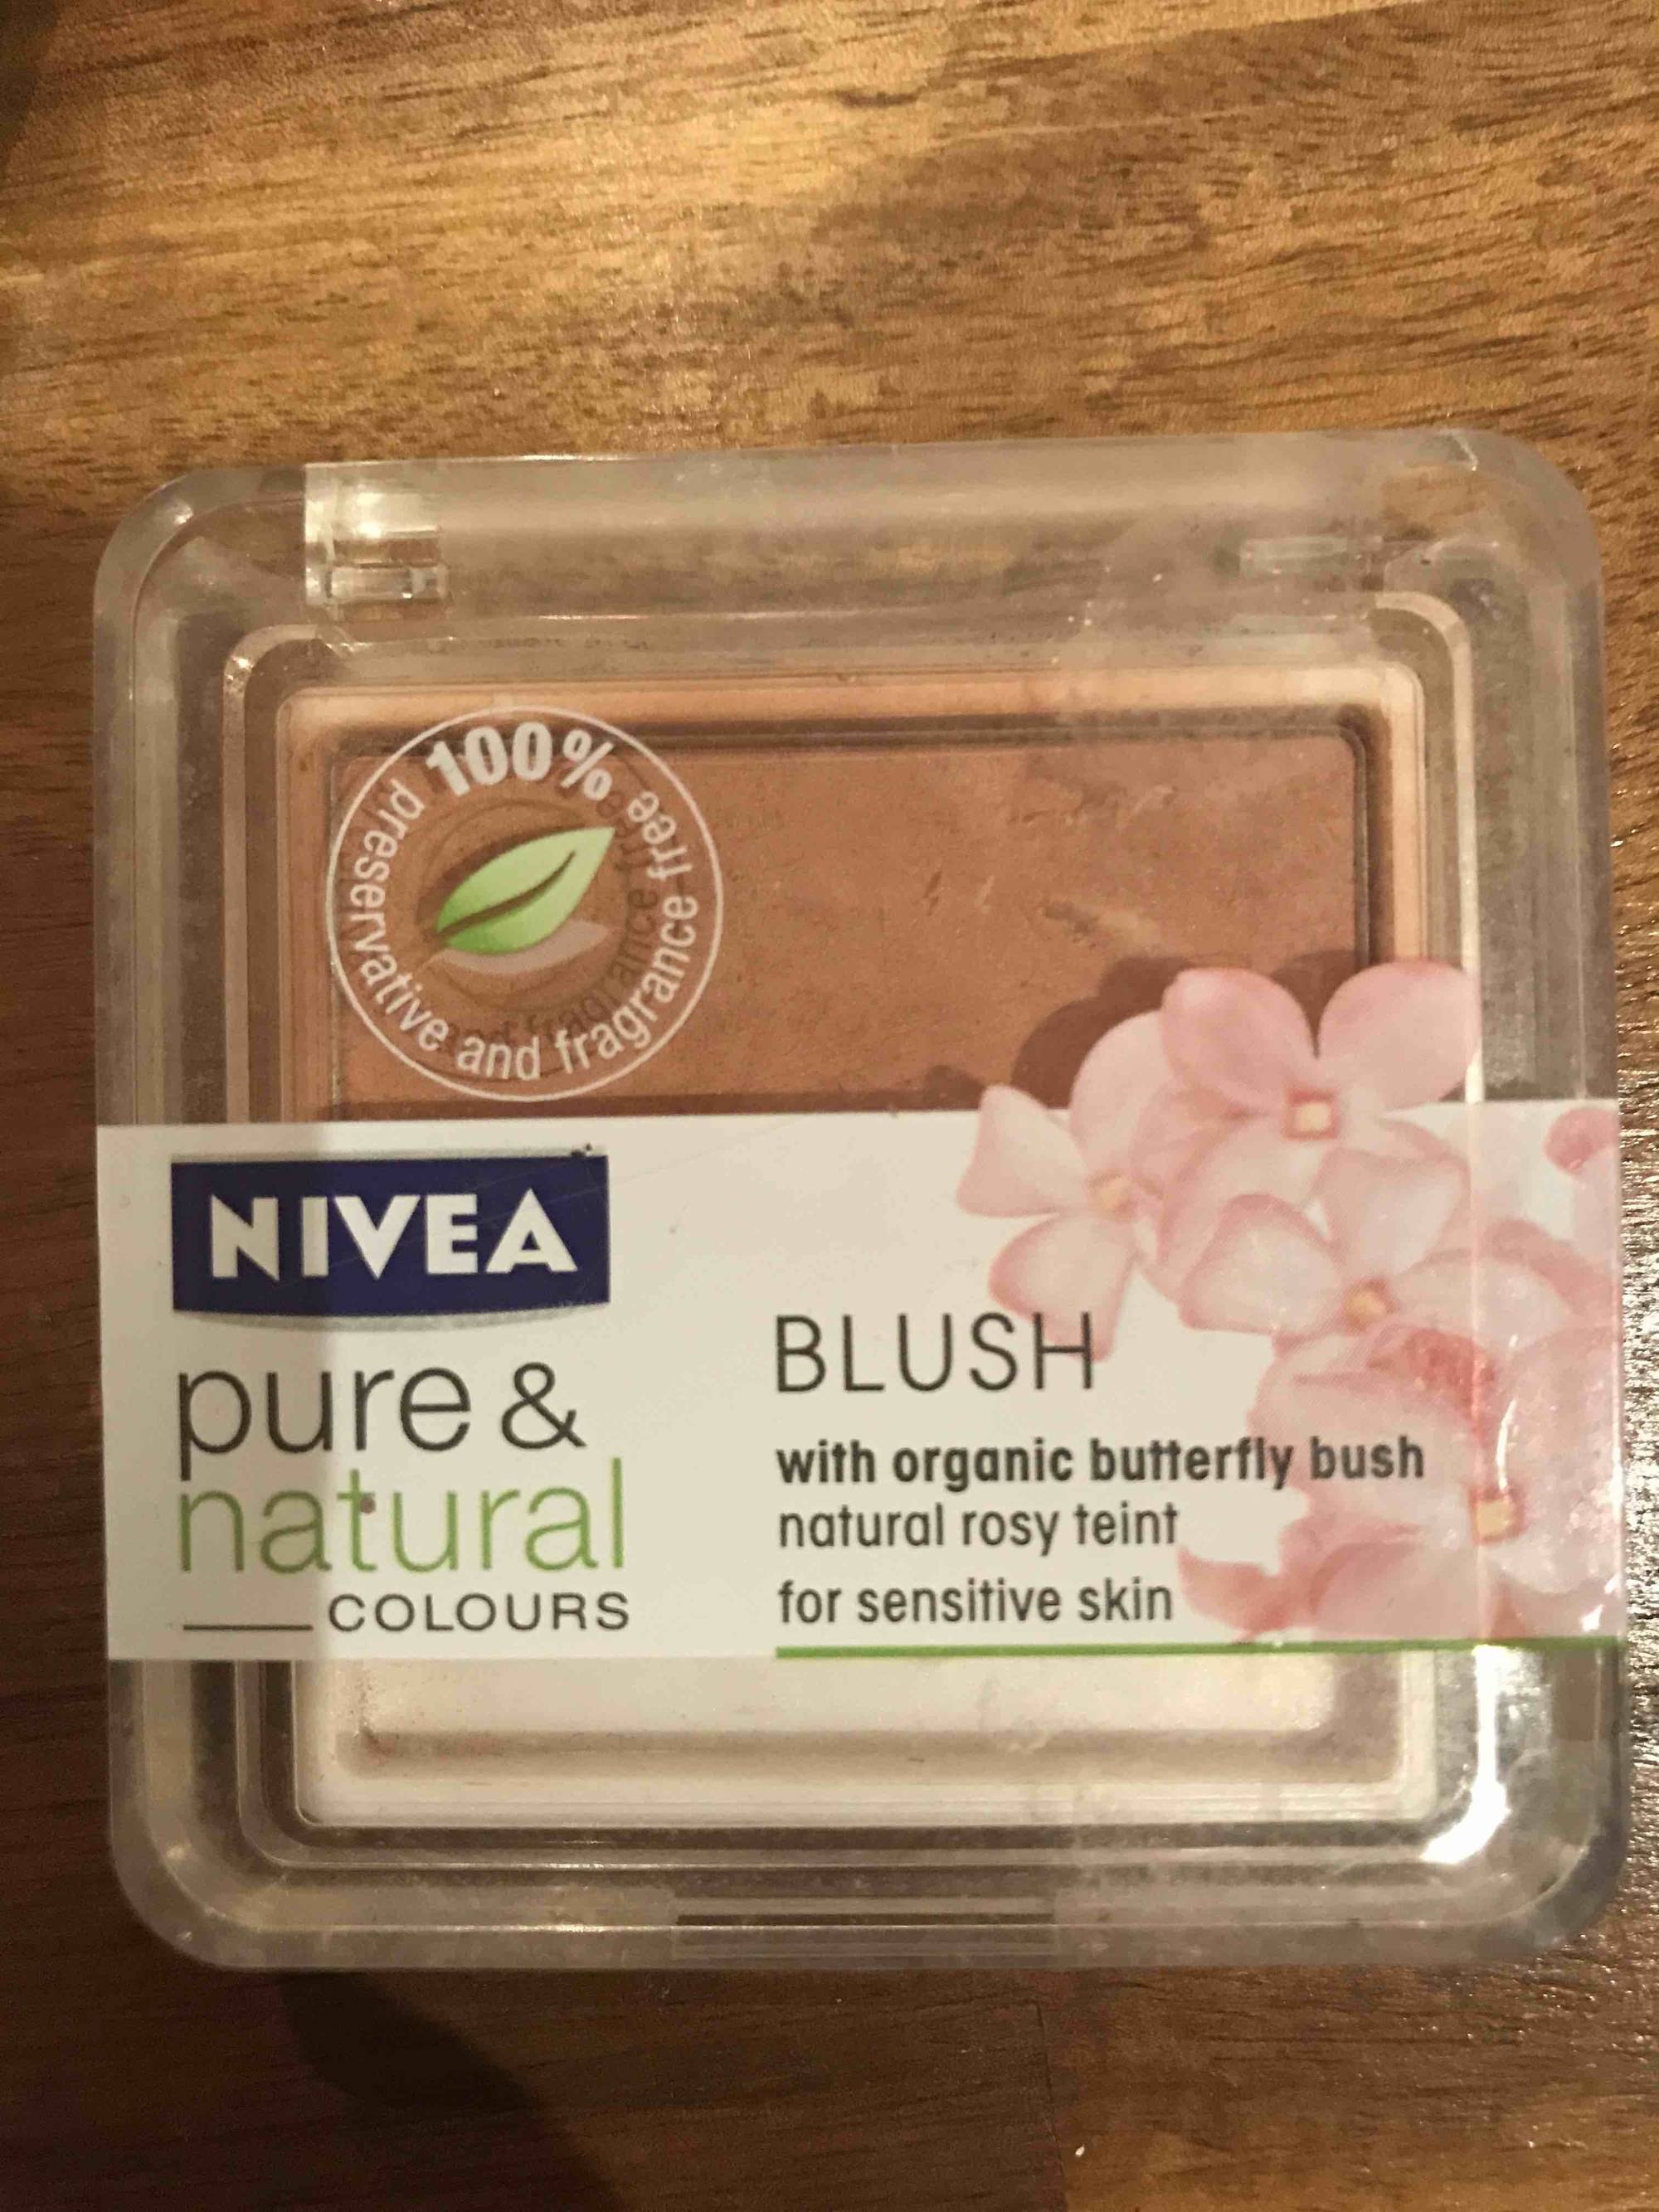 NIVEA - Pure & natural colours - blush with organic butterfly bush